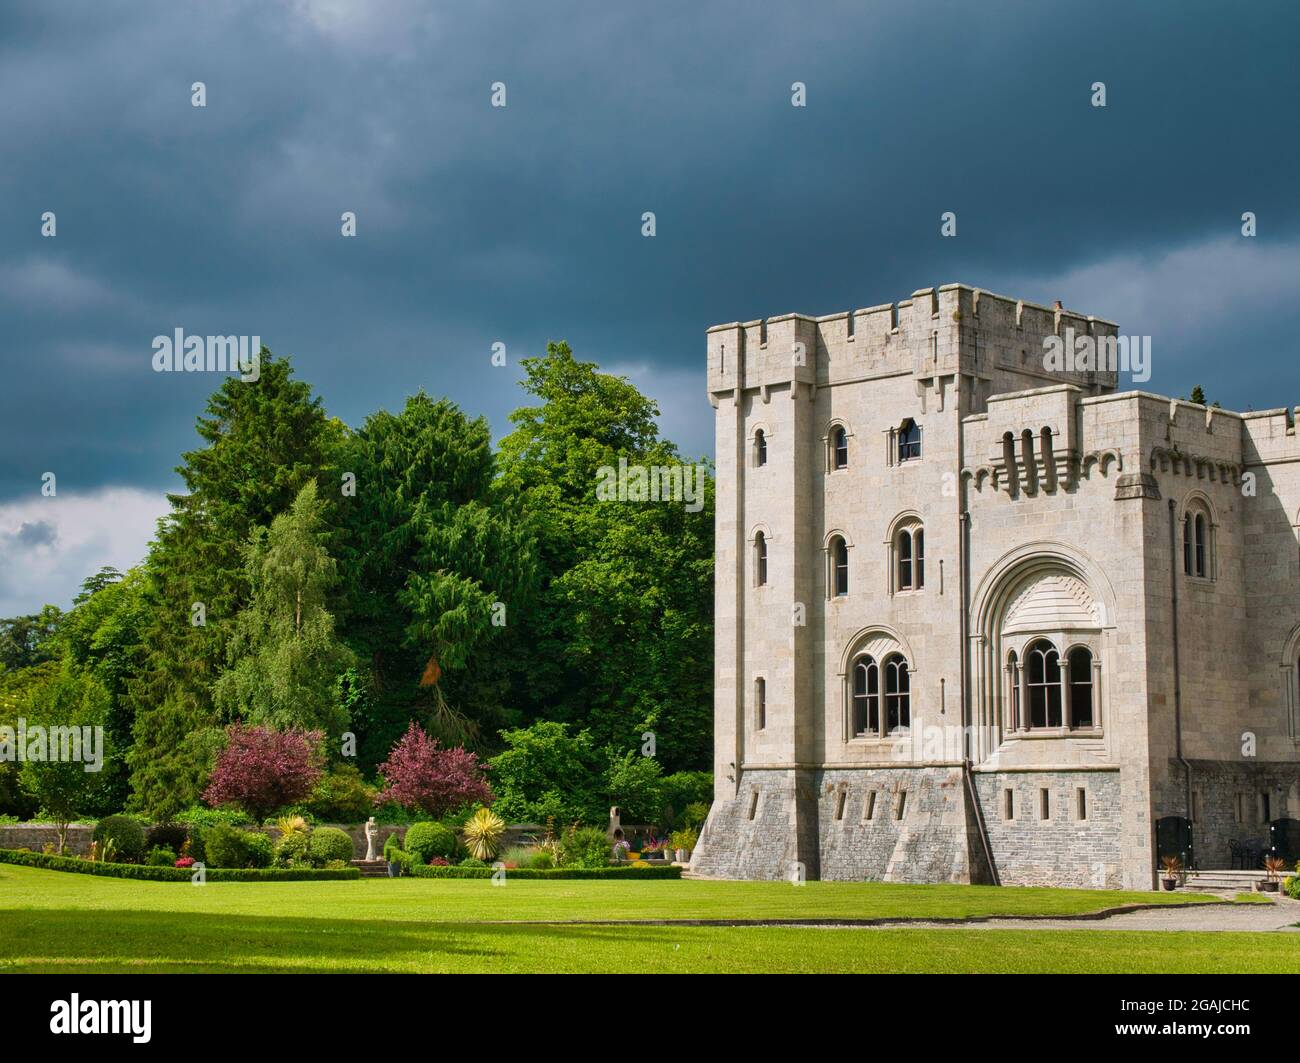 The 19th-century country house and gardens of Gosford Castle, situated in Gosford Forest Park near Markethill, County Armagh, Northern Ireland. Stock Photo